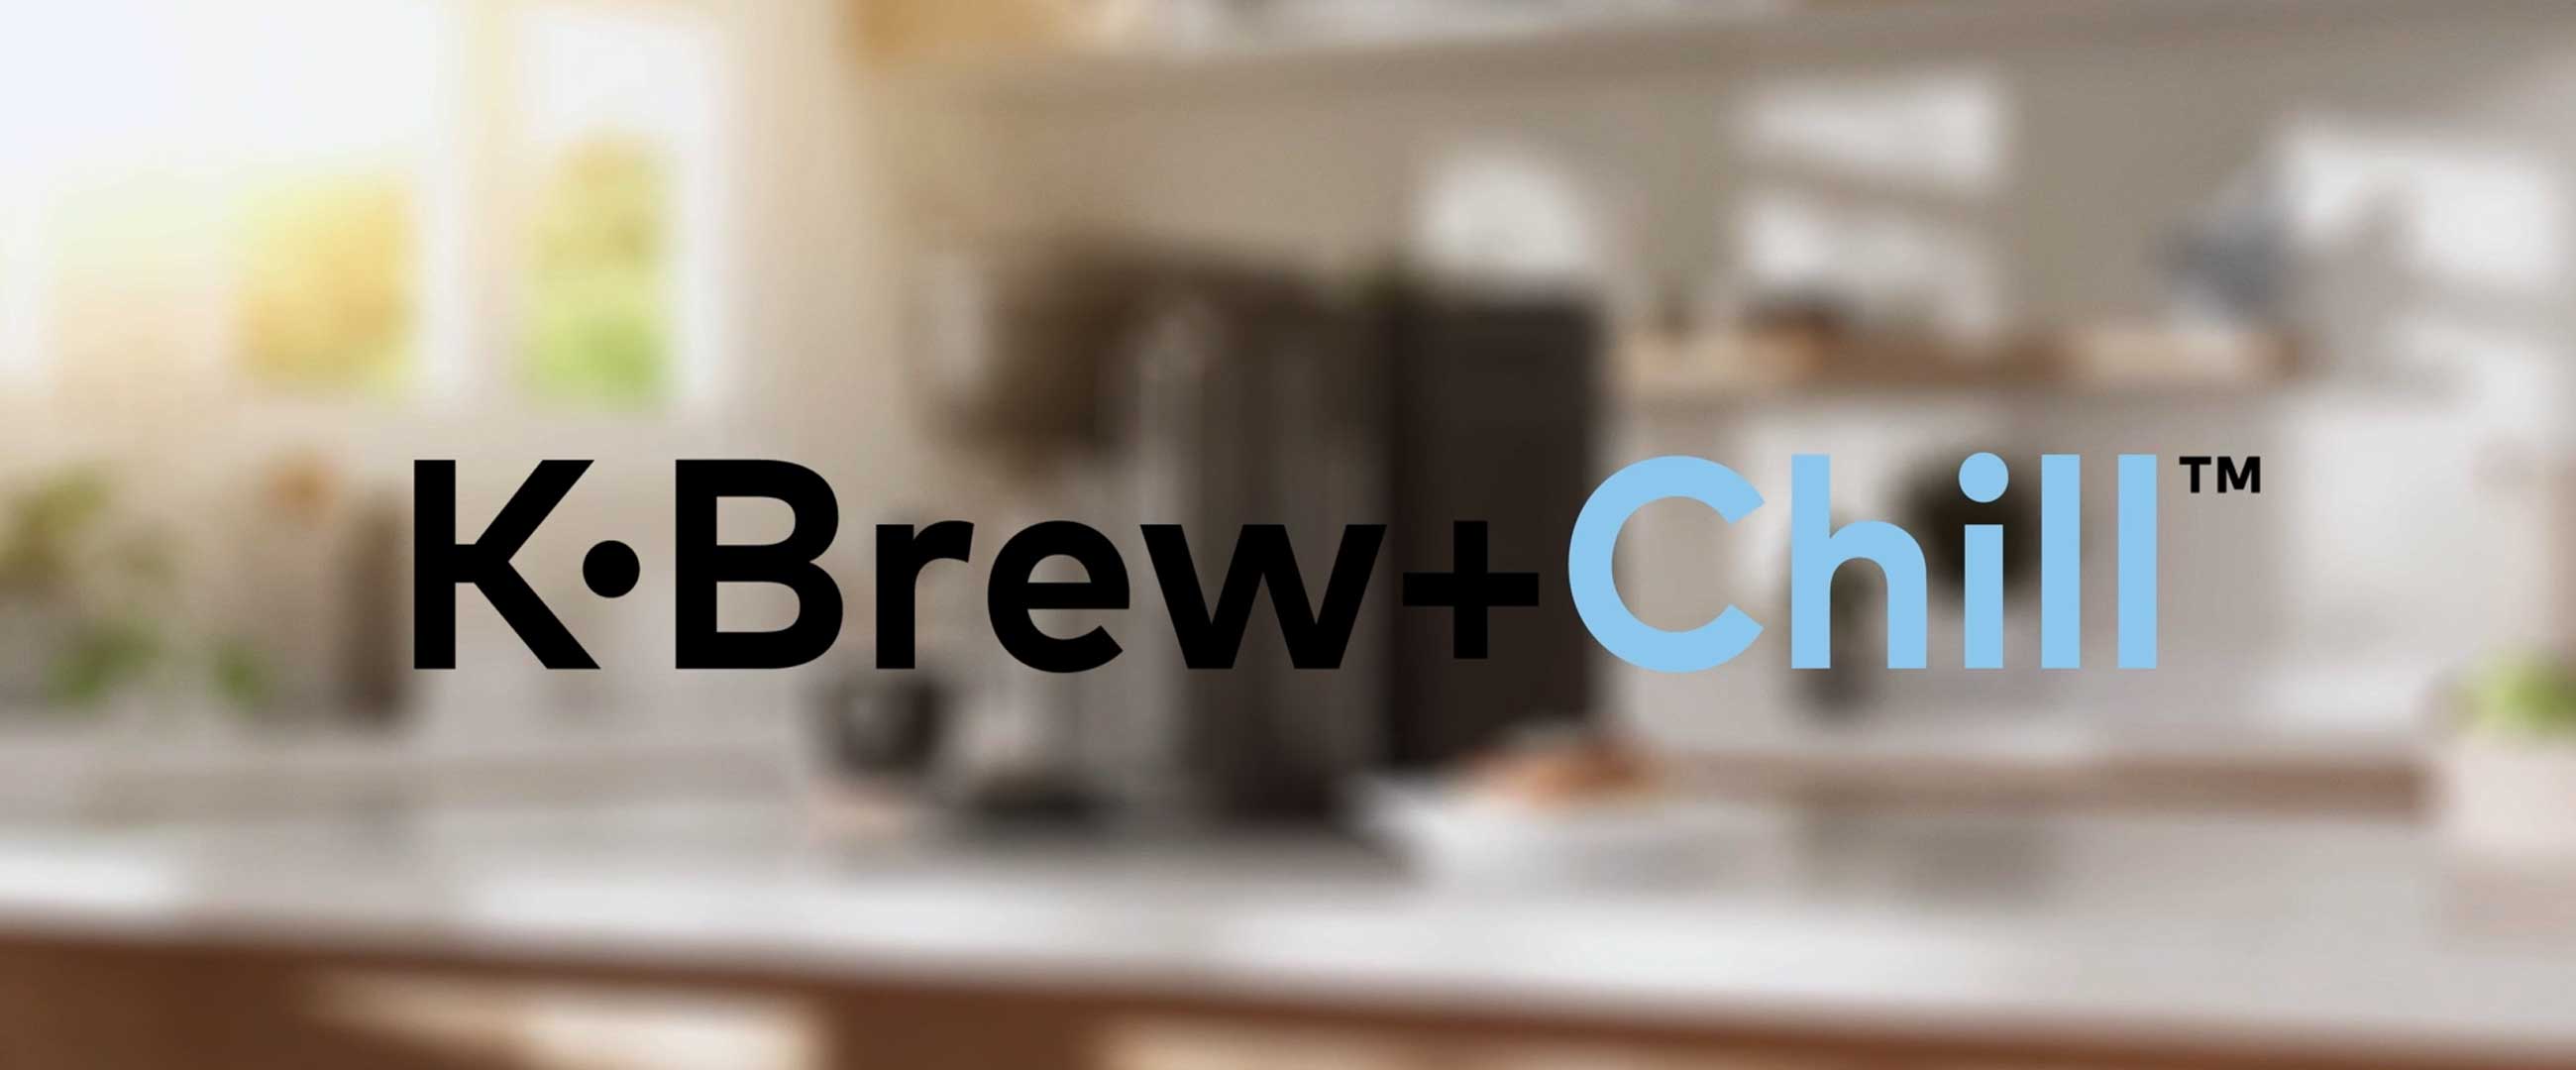 Keurig® Introduces K-Brew + Chill™ Brewer with QuickChill Technology™